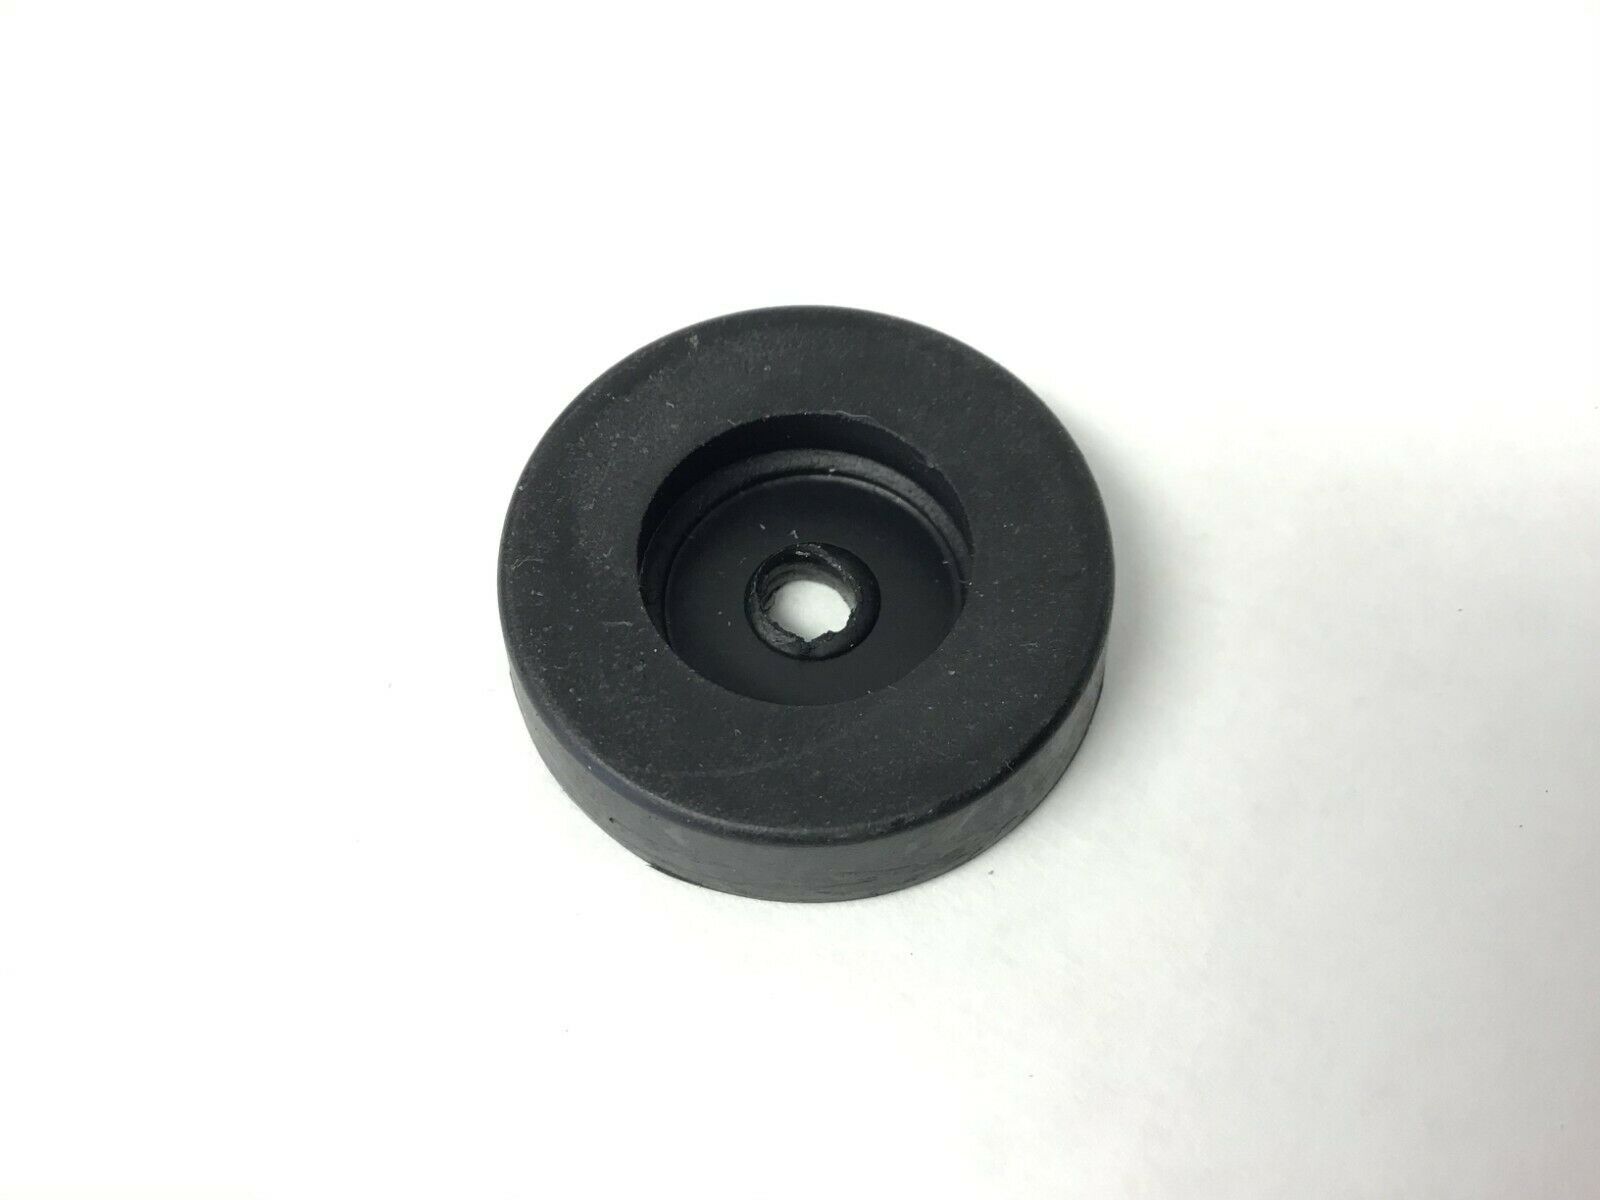 True Fitness TPS300-1 07-3PS3474K Treadmill Front Base Pad Rubber Level (Used)